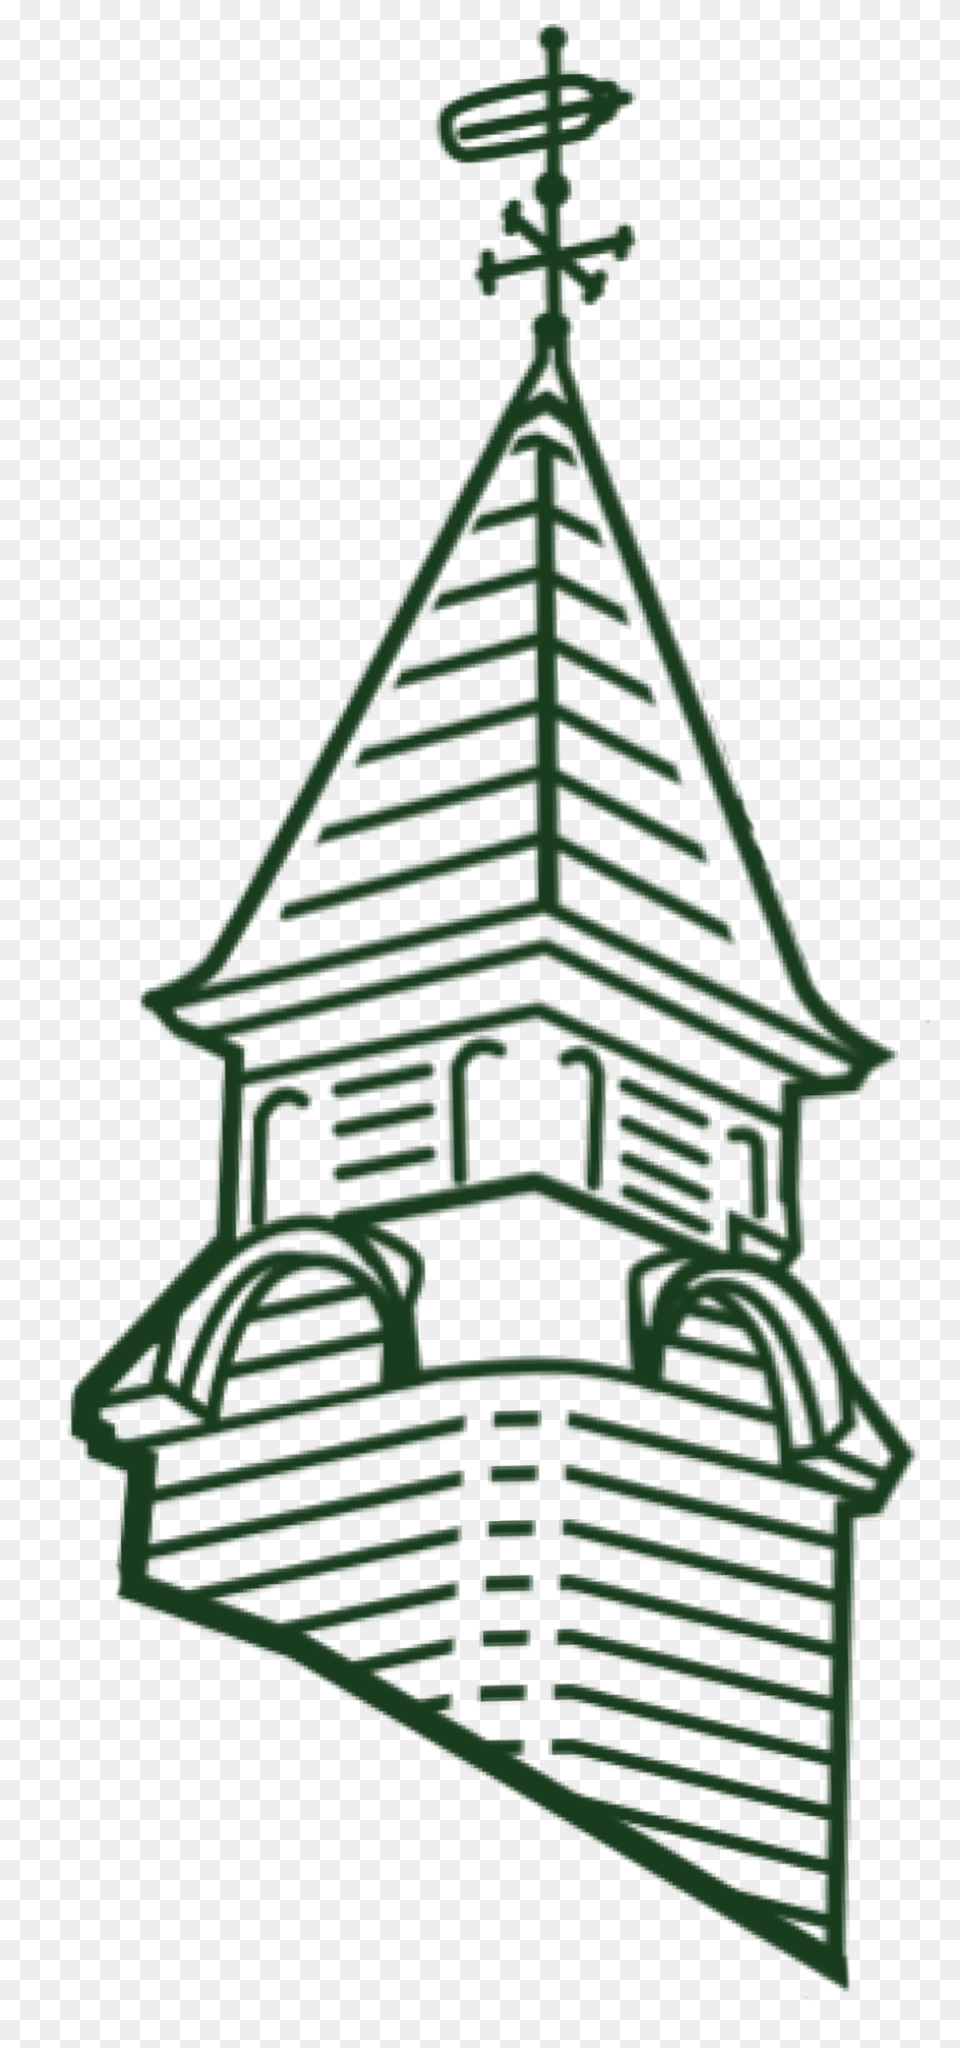 Home, Architecture, Bell Tower, Building, Spire Png